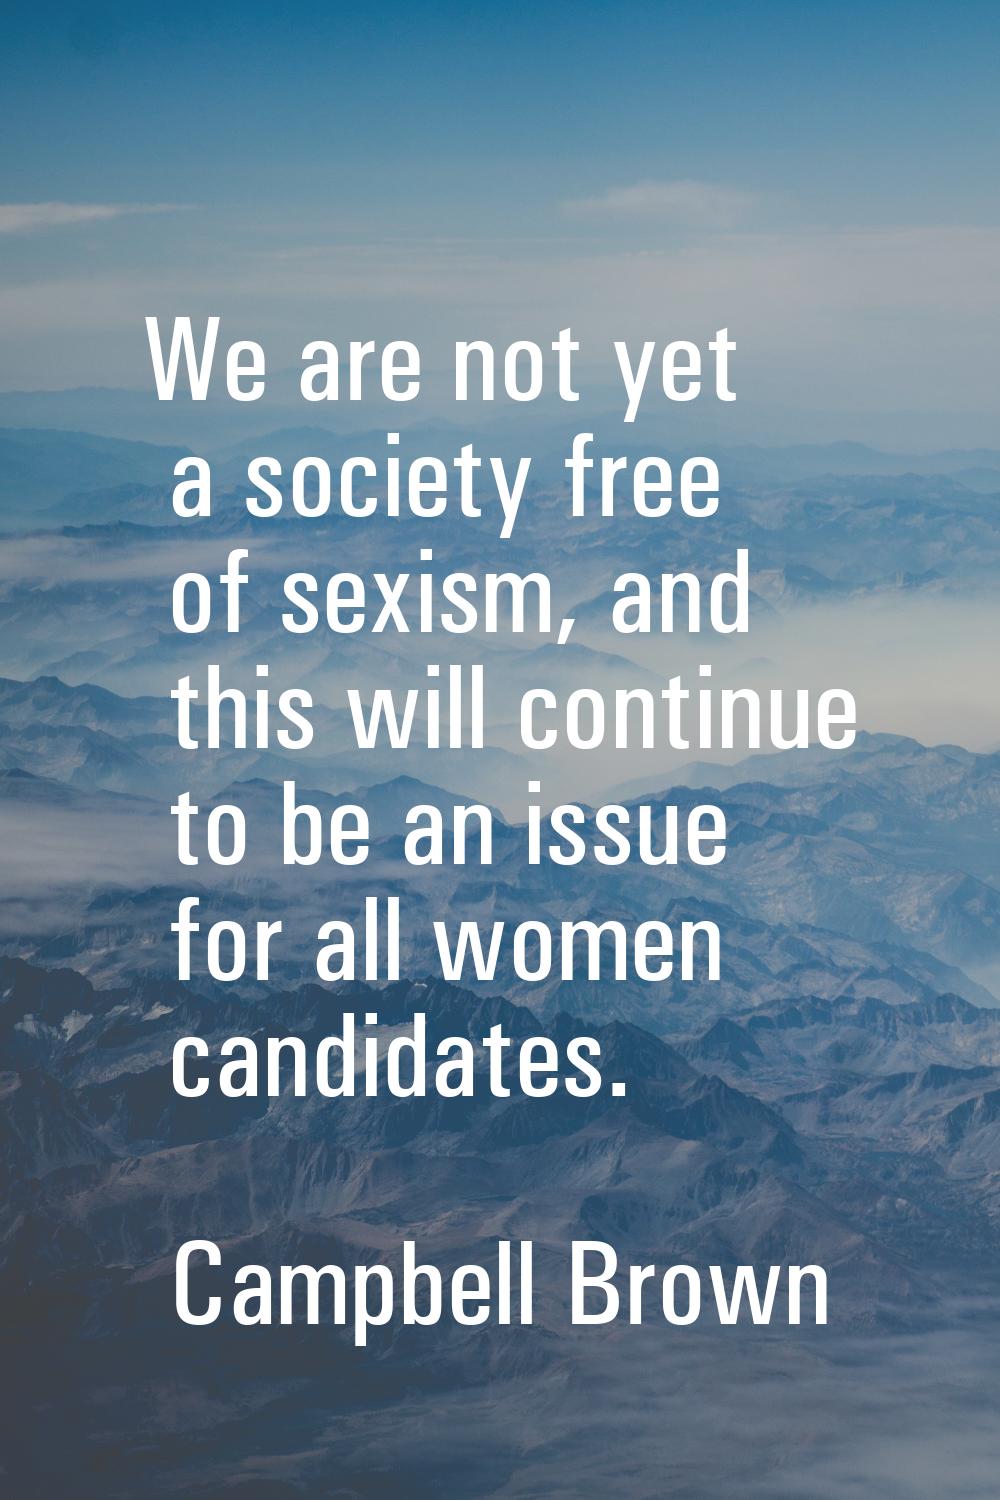 We are not yet a society free of sexism, and this will continue to be an issue for all women candid